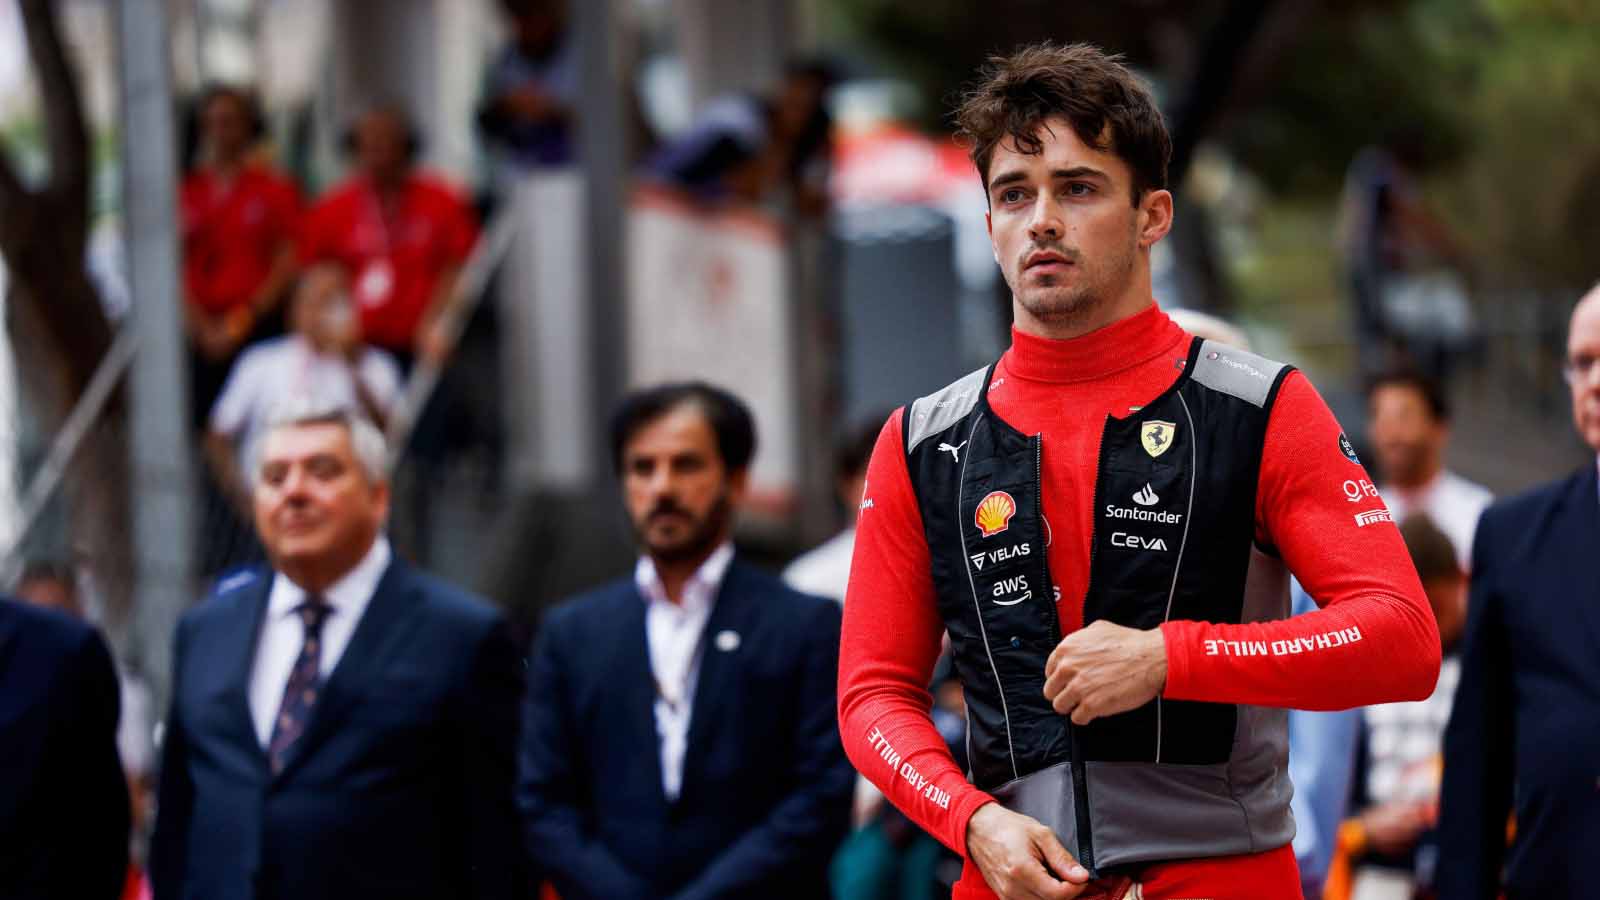 Ferrari driver Charles Leclerc in an ice vest. Monaco May 2022.